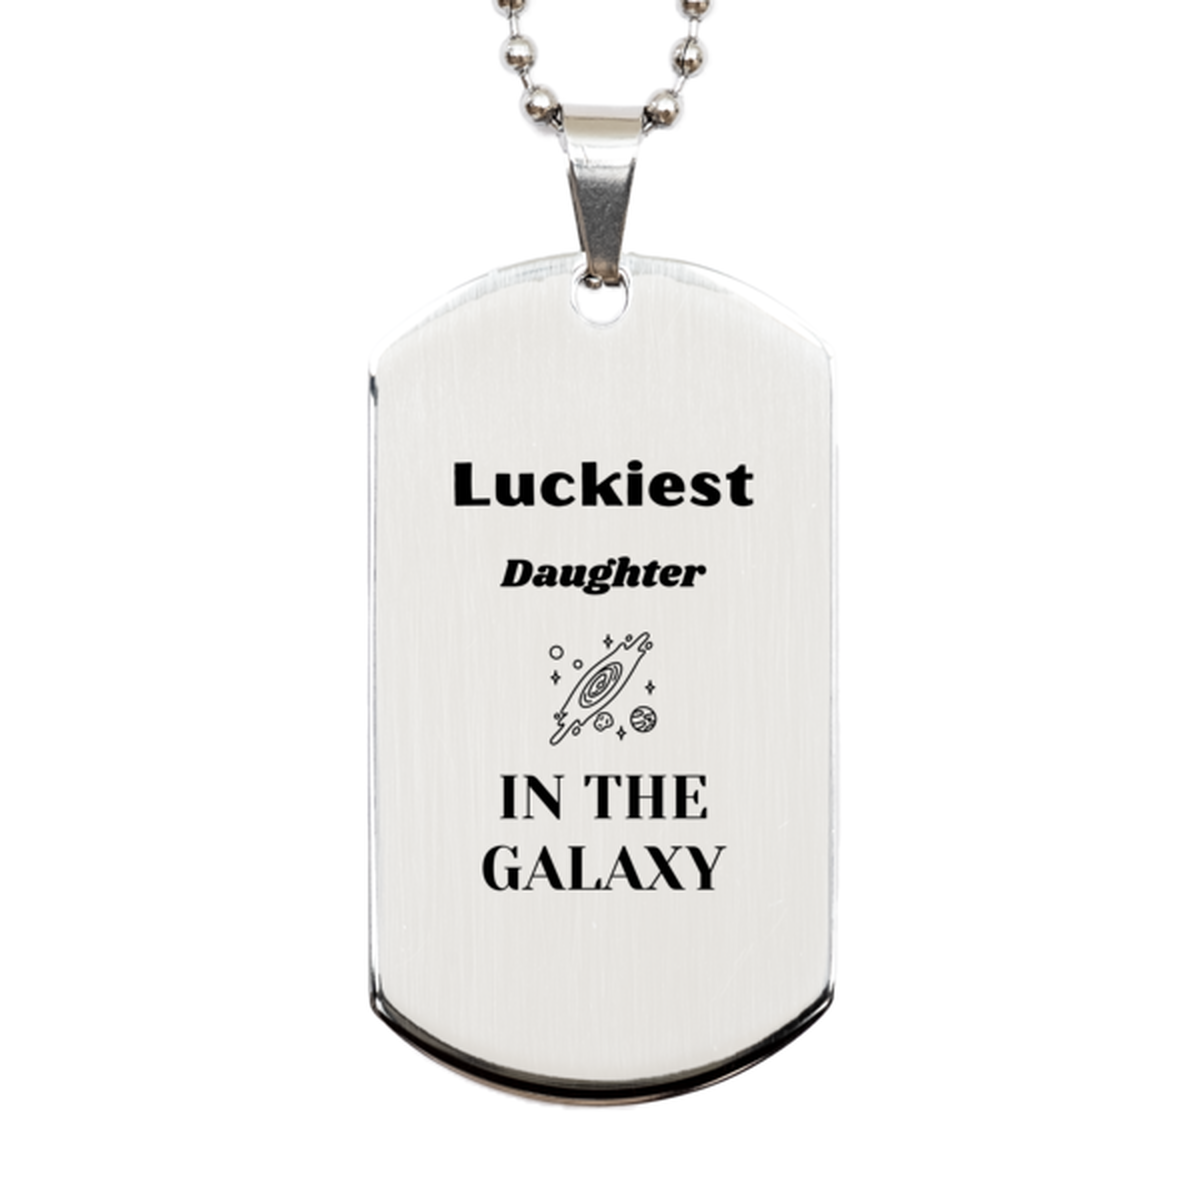 Luckiest Daughter in the Galaxy, To My Daughter Engraved Gifts, Christmas Daughter Silver Dog Tag Gifts, X-mas Birthday Unique Gifts For Daughter Men Women